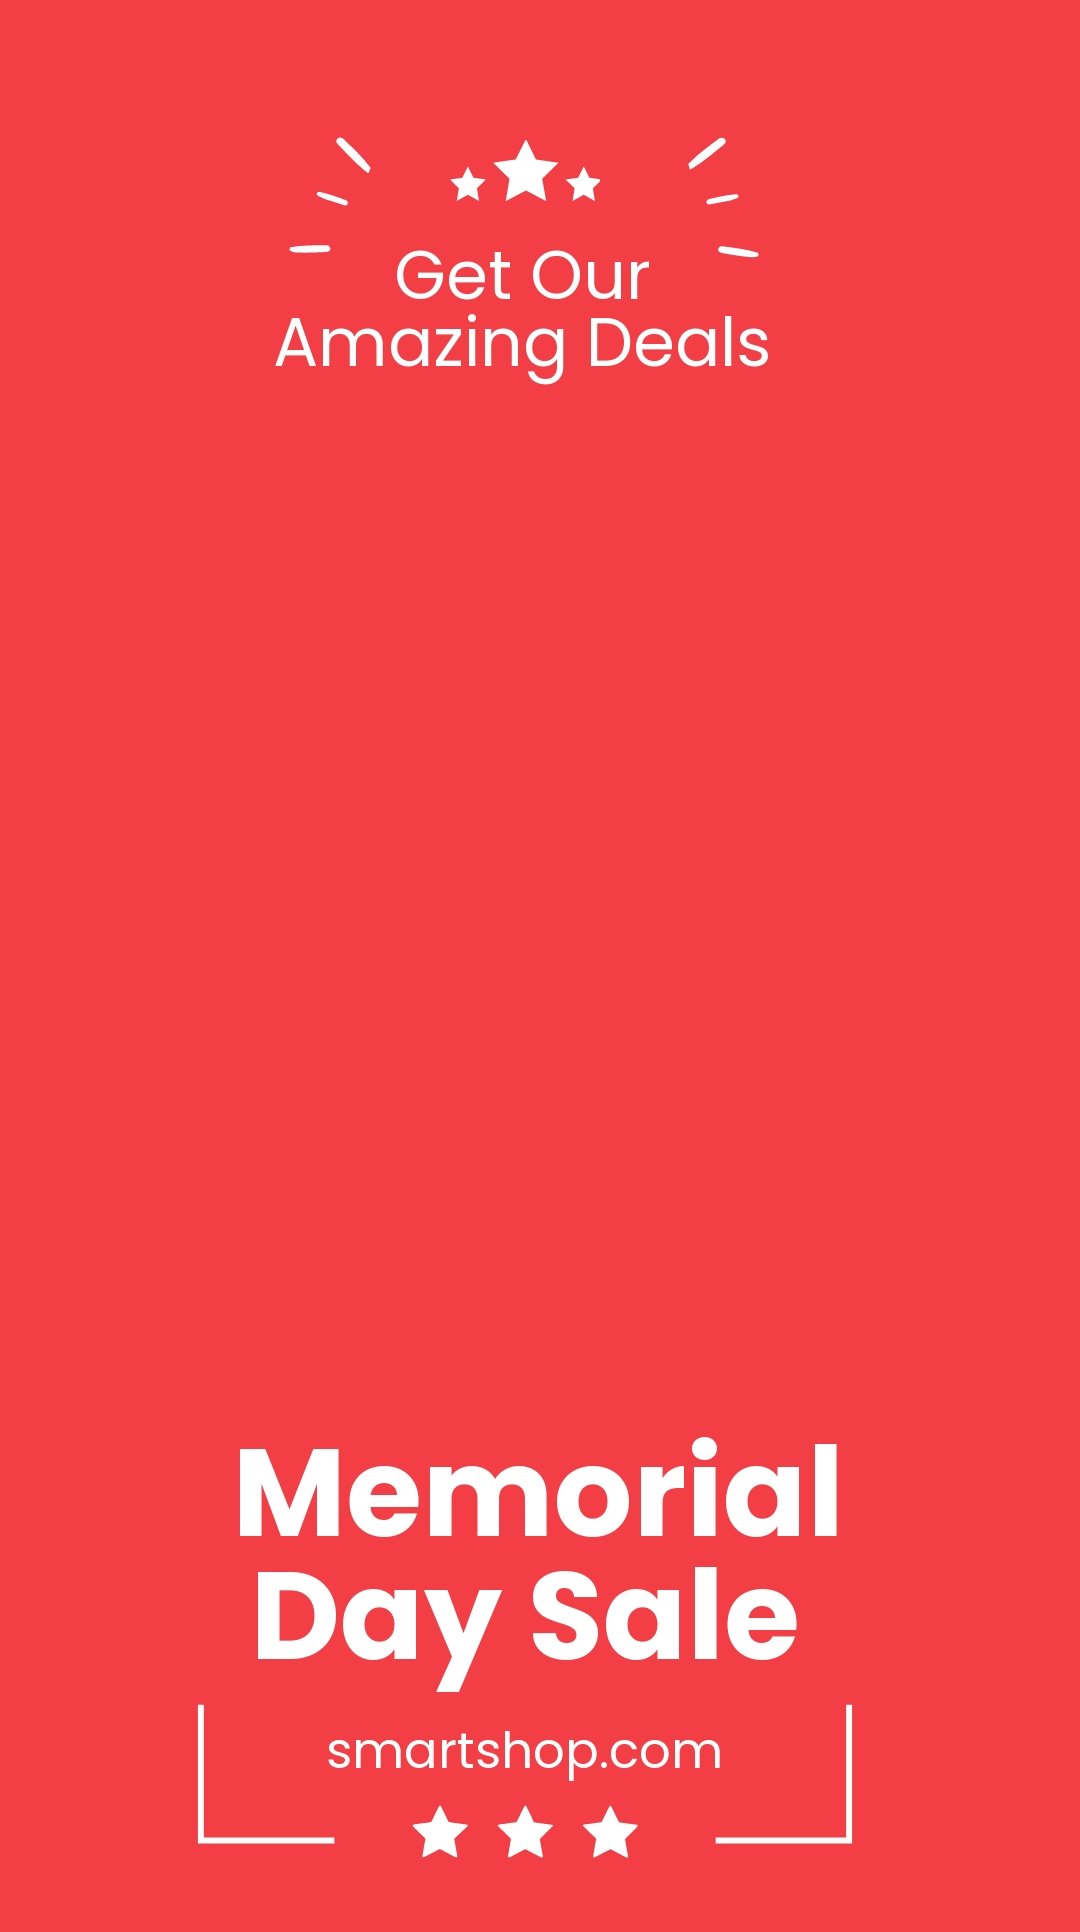 Memorial Day Sale Snapchat Geofilter Template